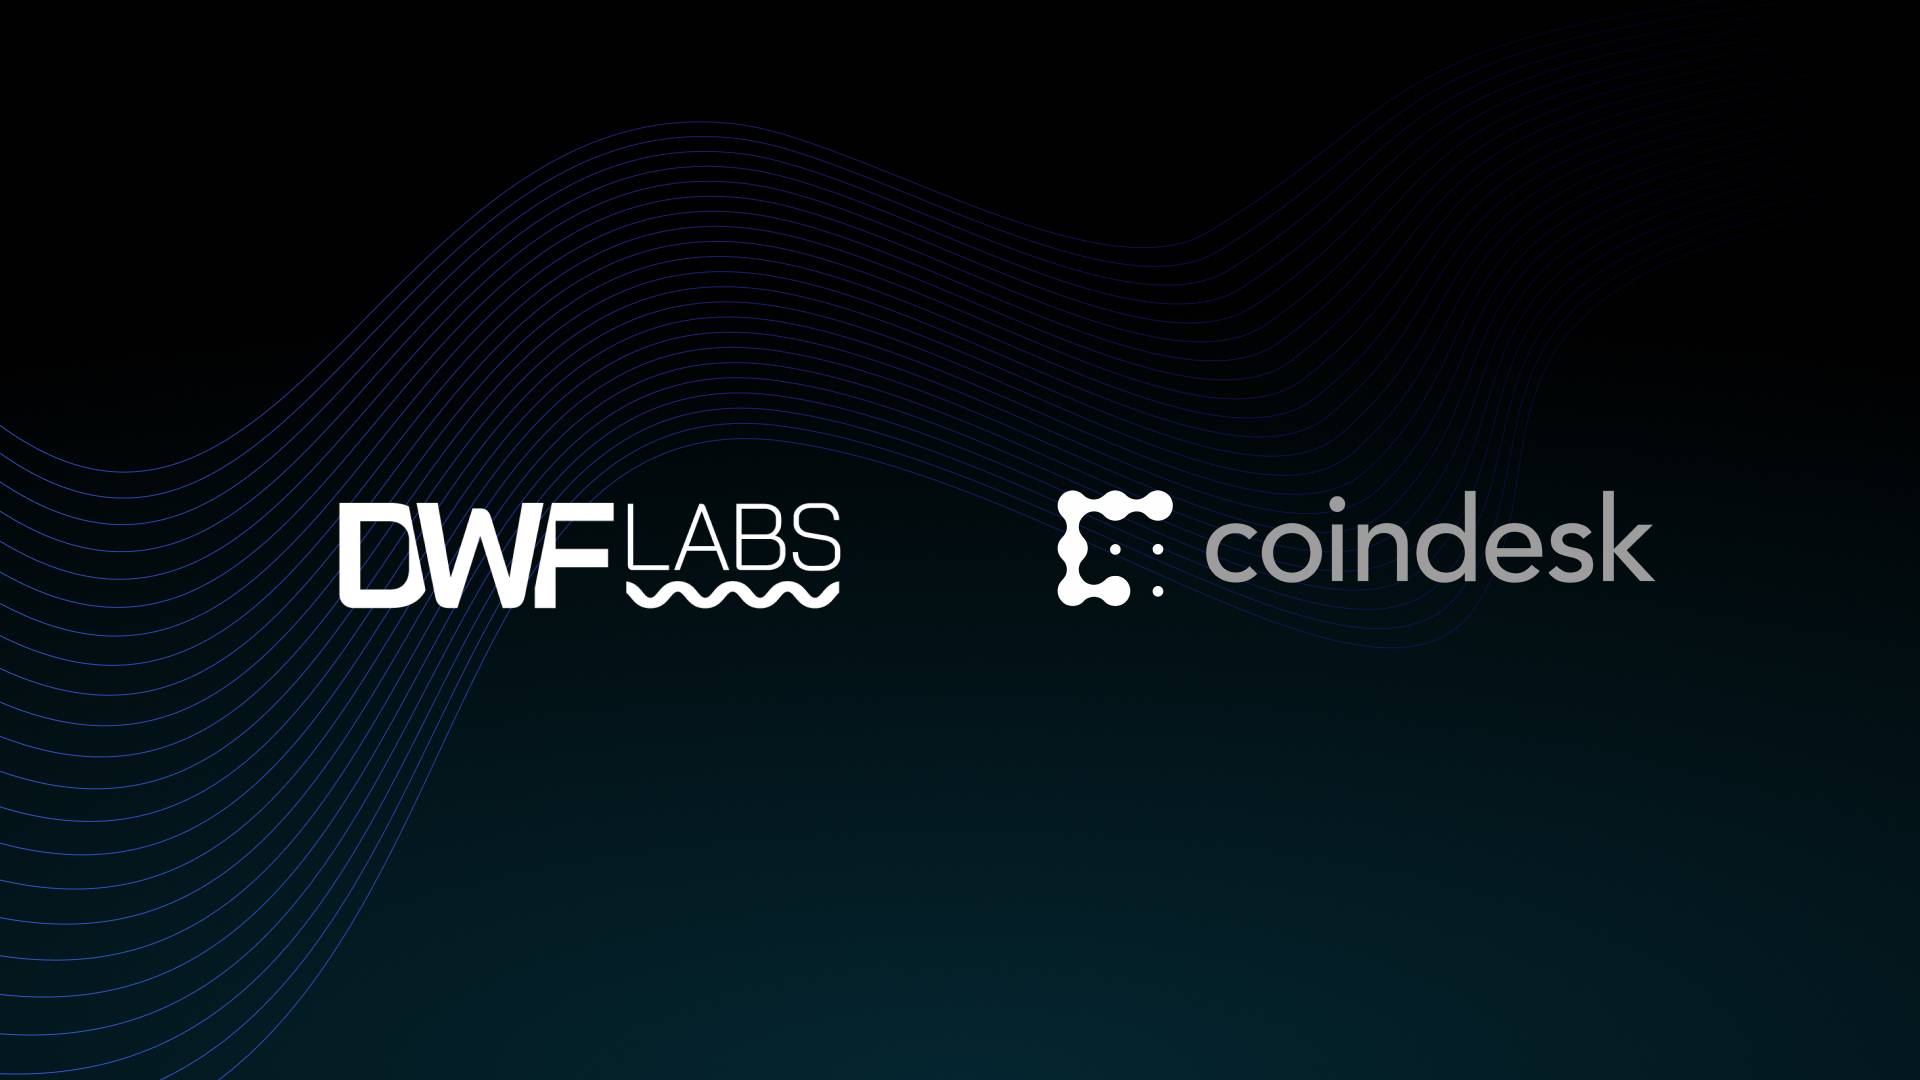 Market Maker DWF Labs Emerges as Top Crypto Investor